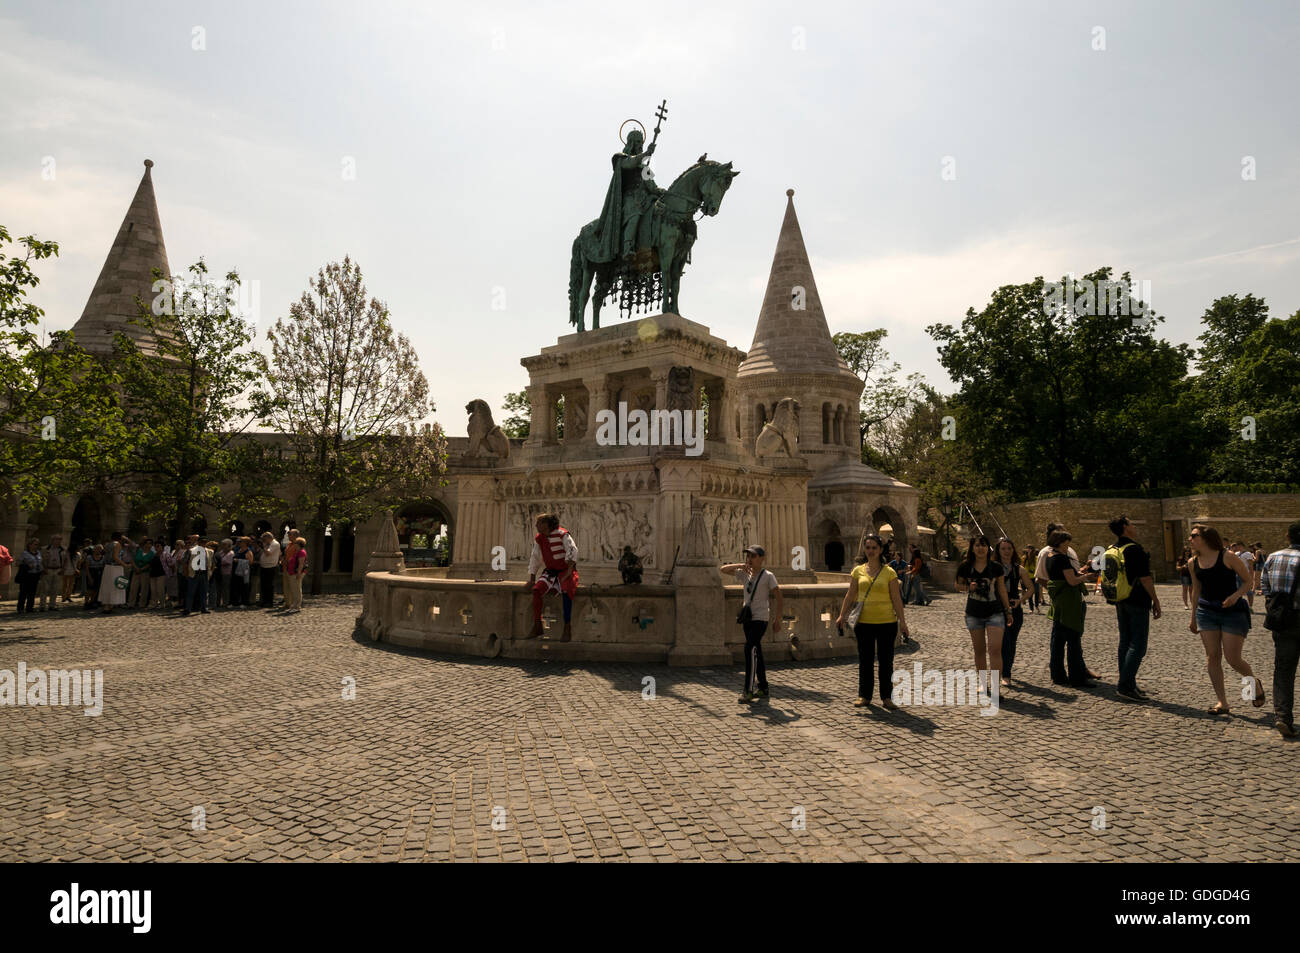 A statue of Saint Stephen, Grand Prince of the Hungarians and the first King of Hungary in the Fishermen's Bastion close to the Stock Photo